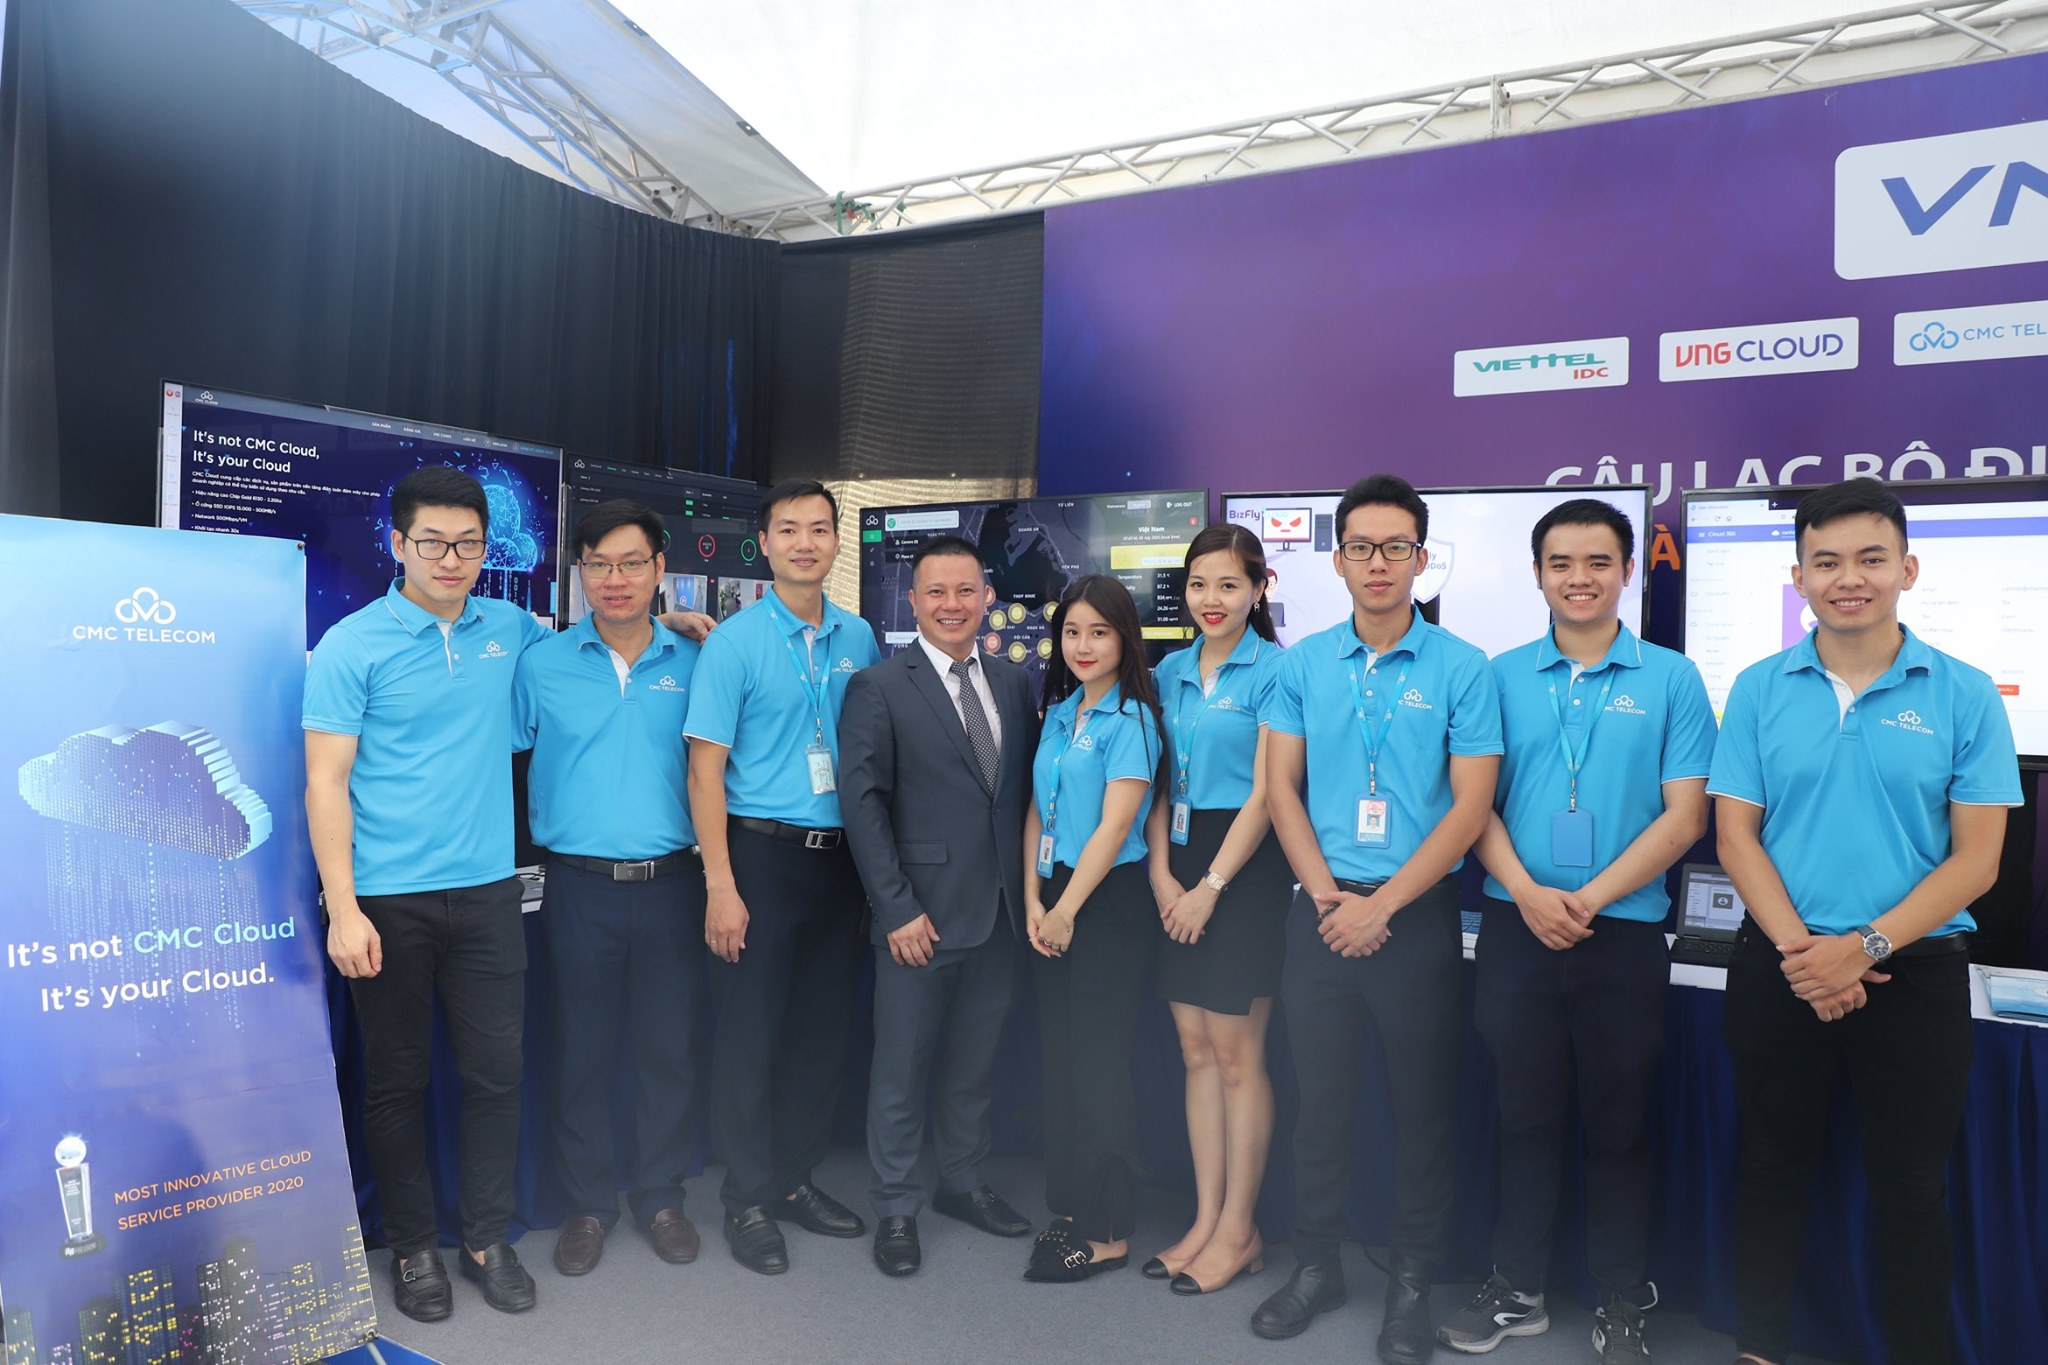 CMC Telecom introduces the "Internet of Things" platform for the first time at Make in Vietnam exhibition